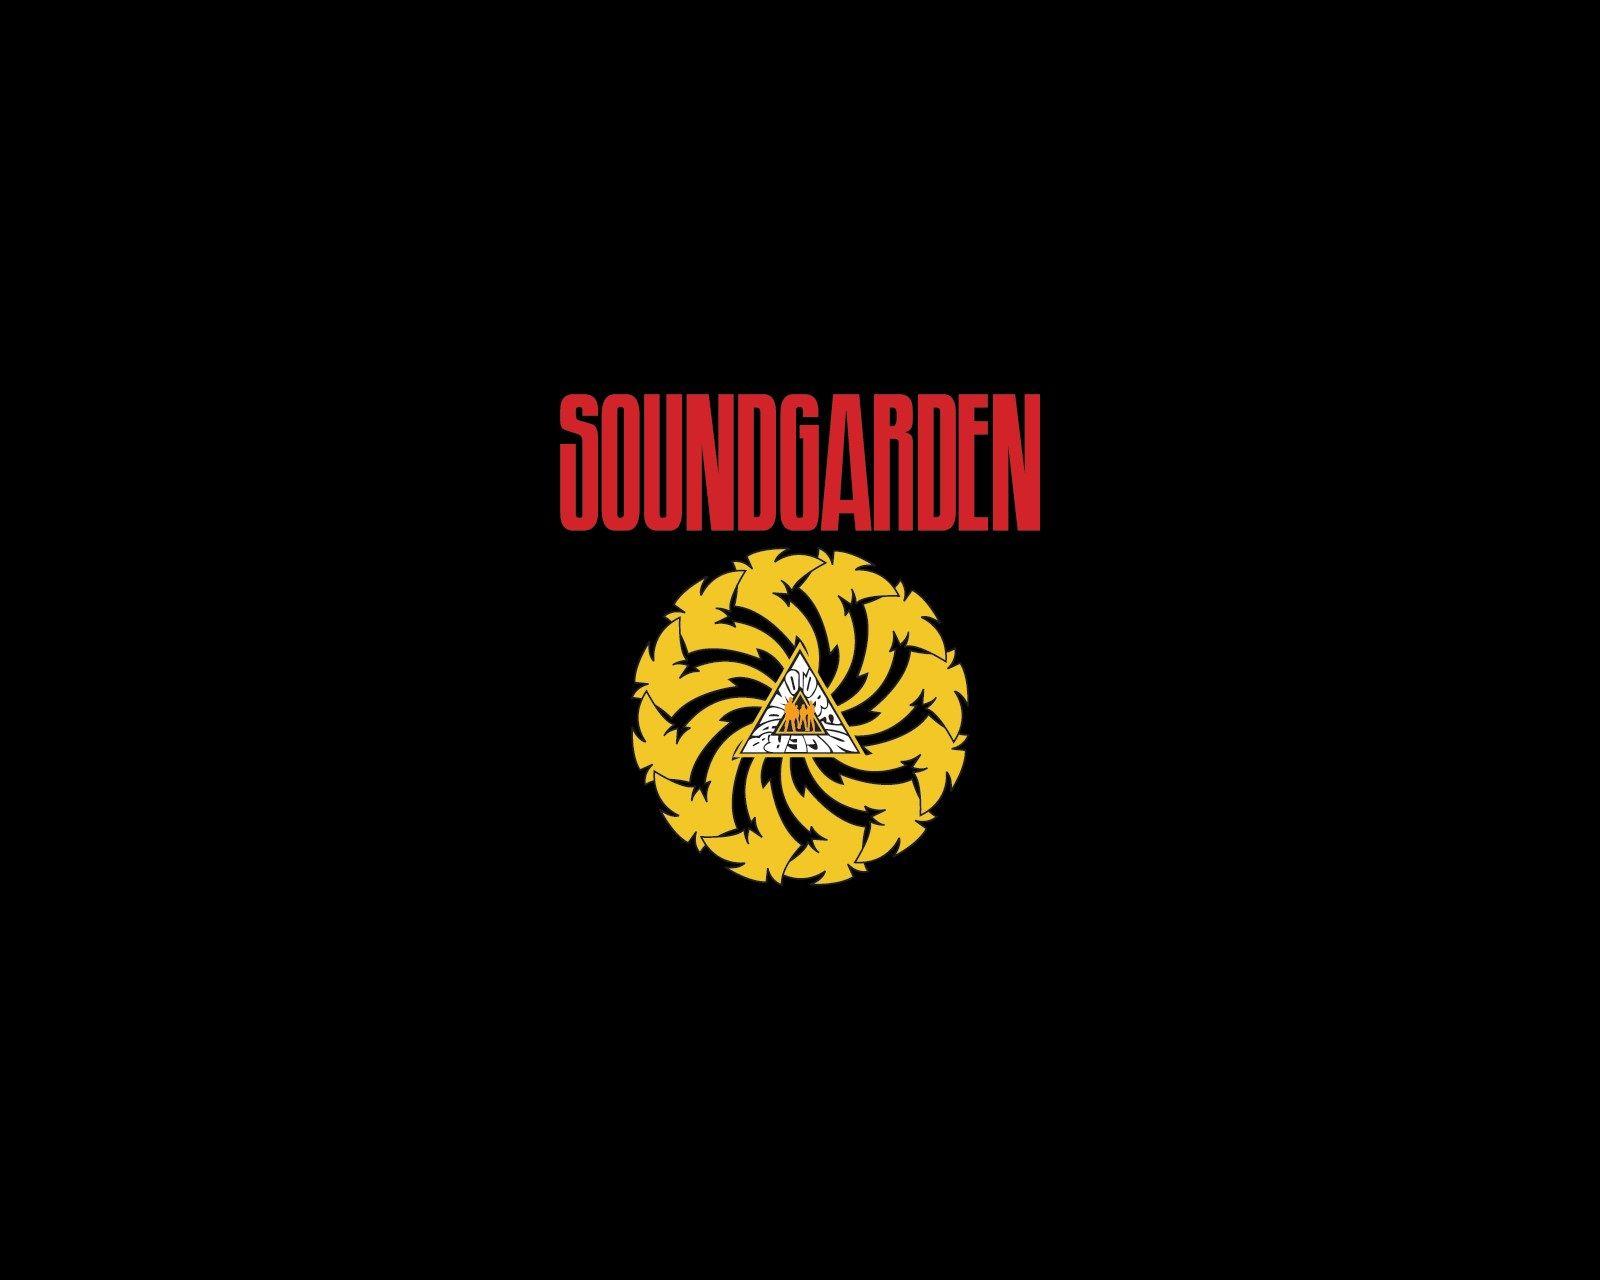 Soundgarden Logo - A Journal of Musical ThingsSo What Happens to That Unfinished